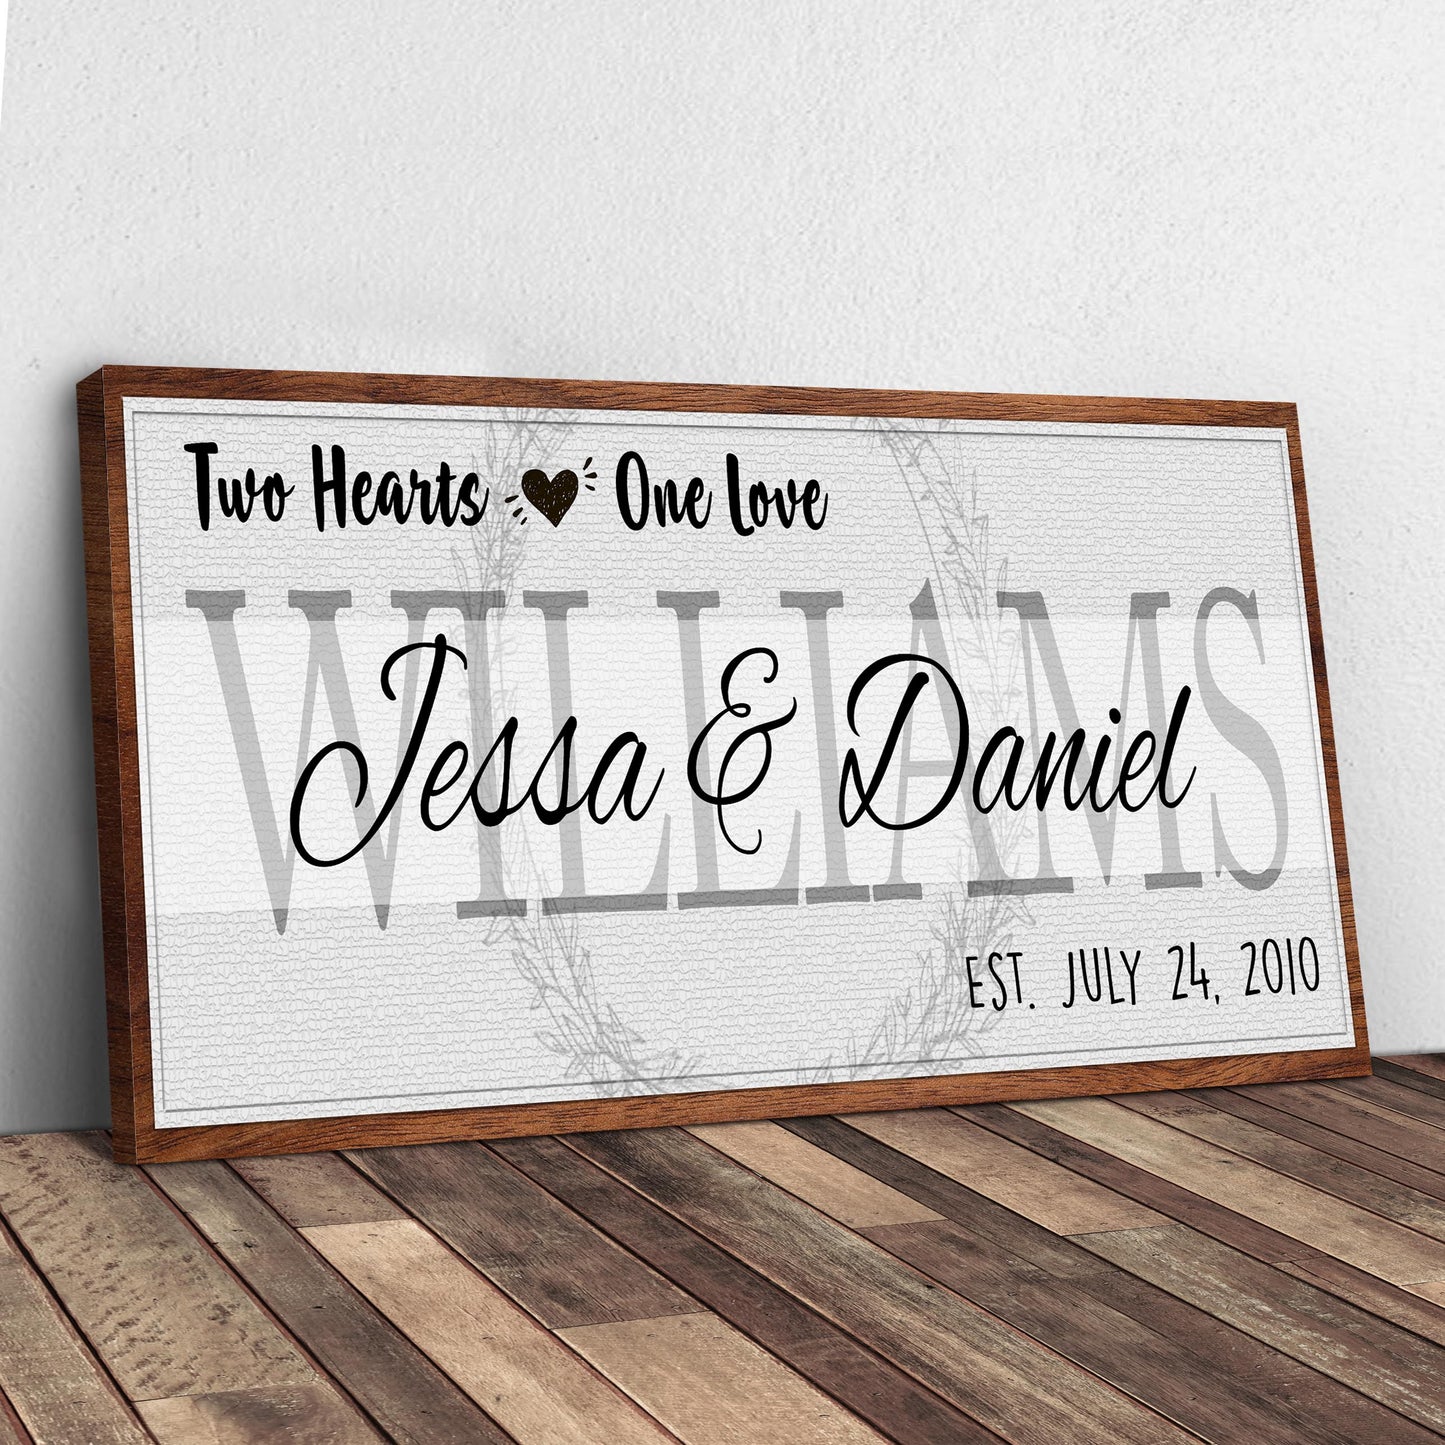 Two Hearts One Love Couple Canvas (Ready to hang) - Wall Art Image by Tailored Canvases